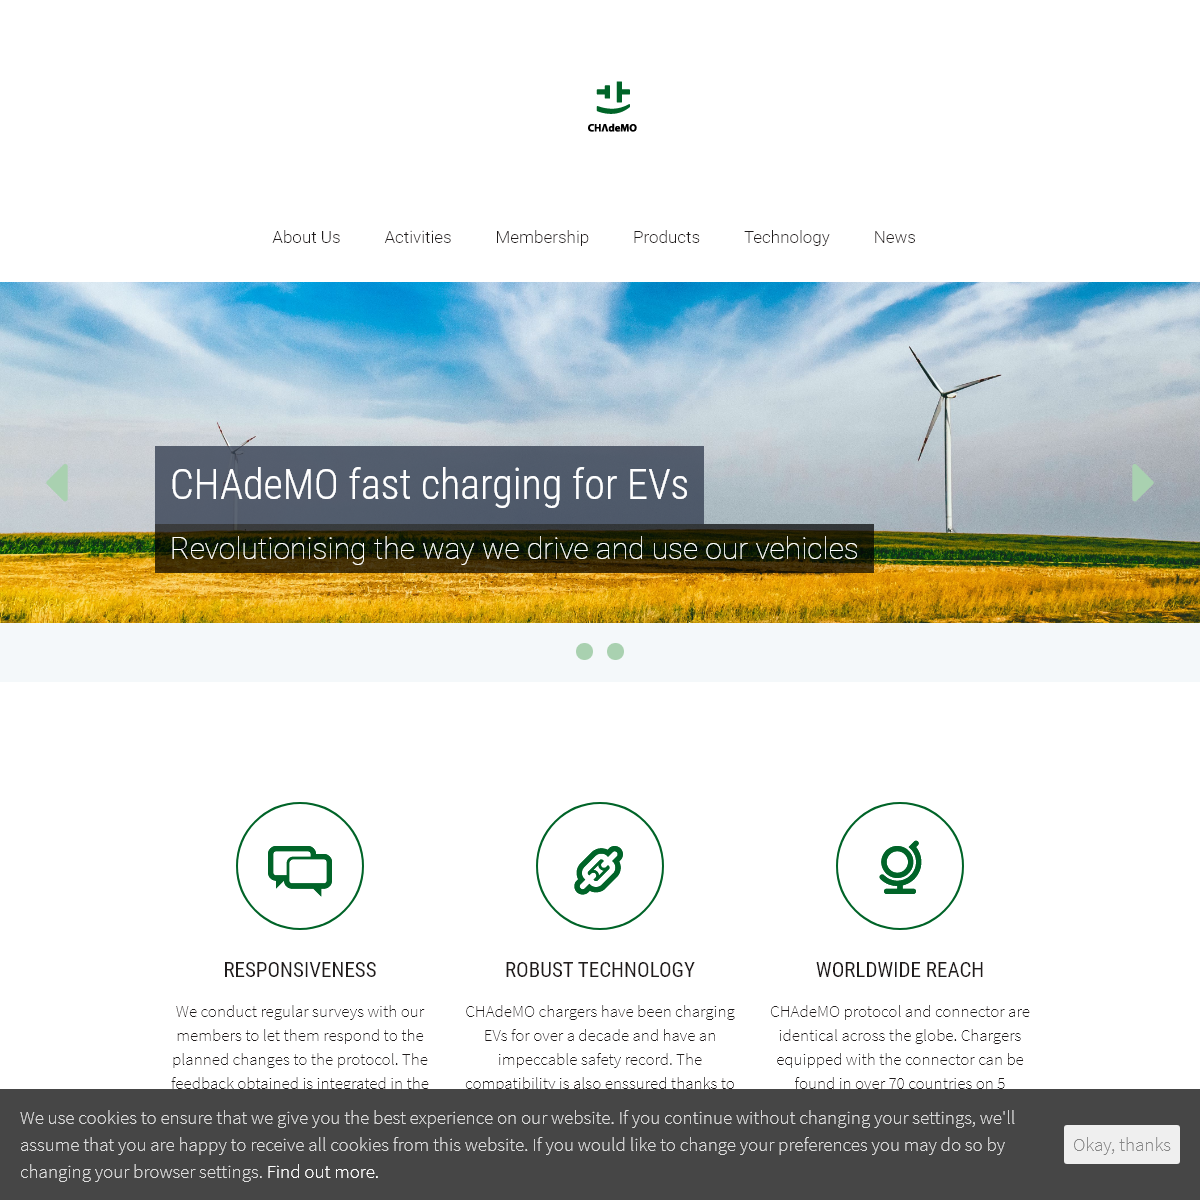 A complete backup of chademo.com